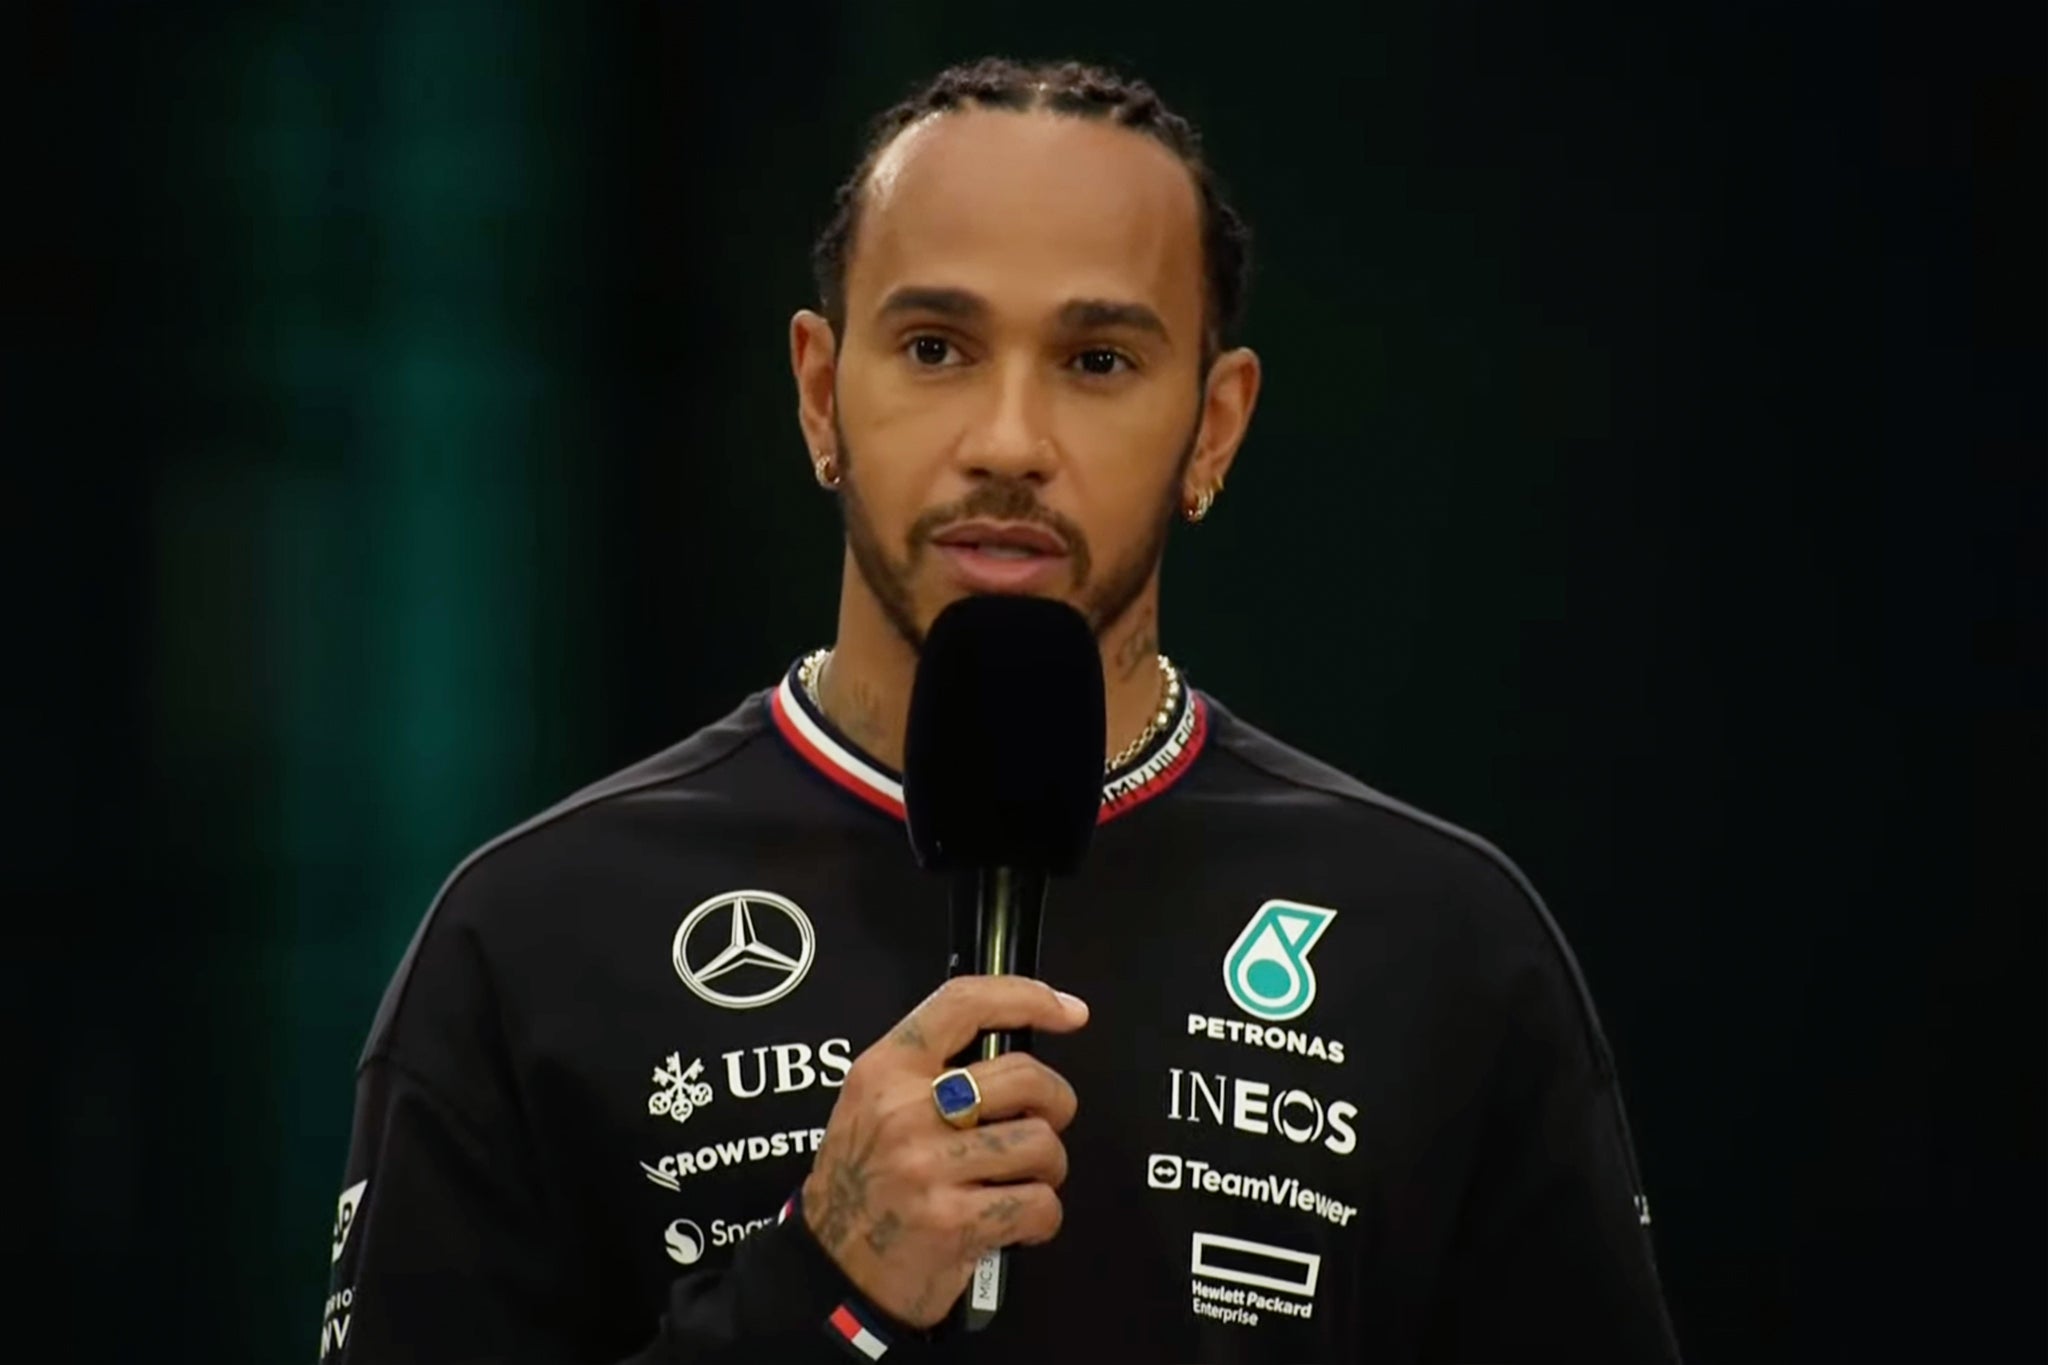 Lewis Hamilton embarks on his final year with Mercedes